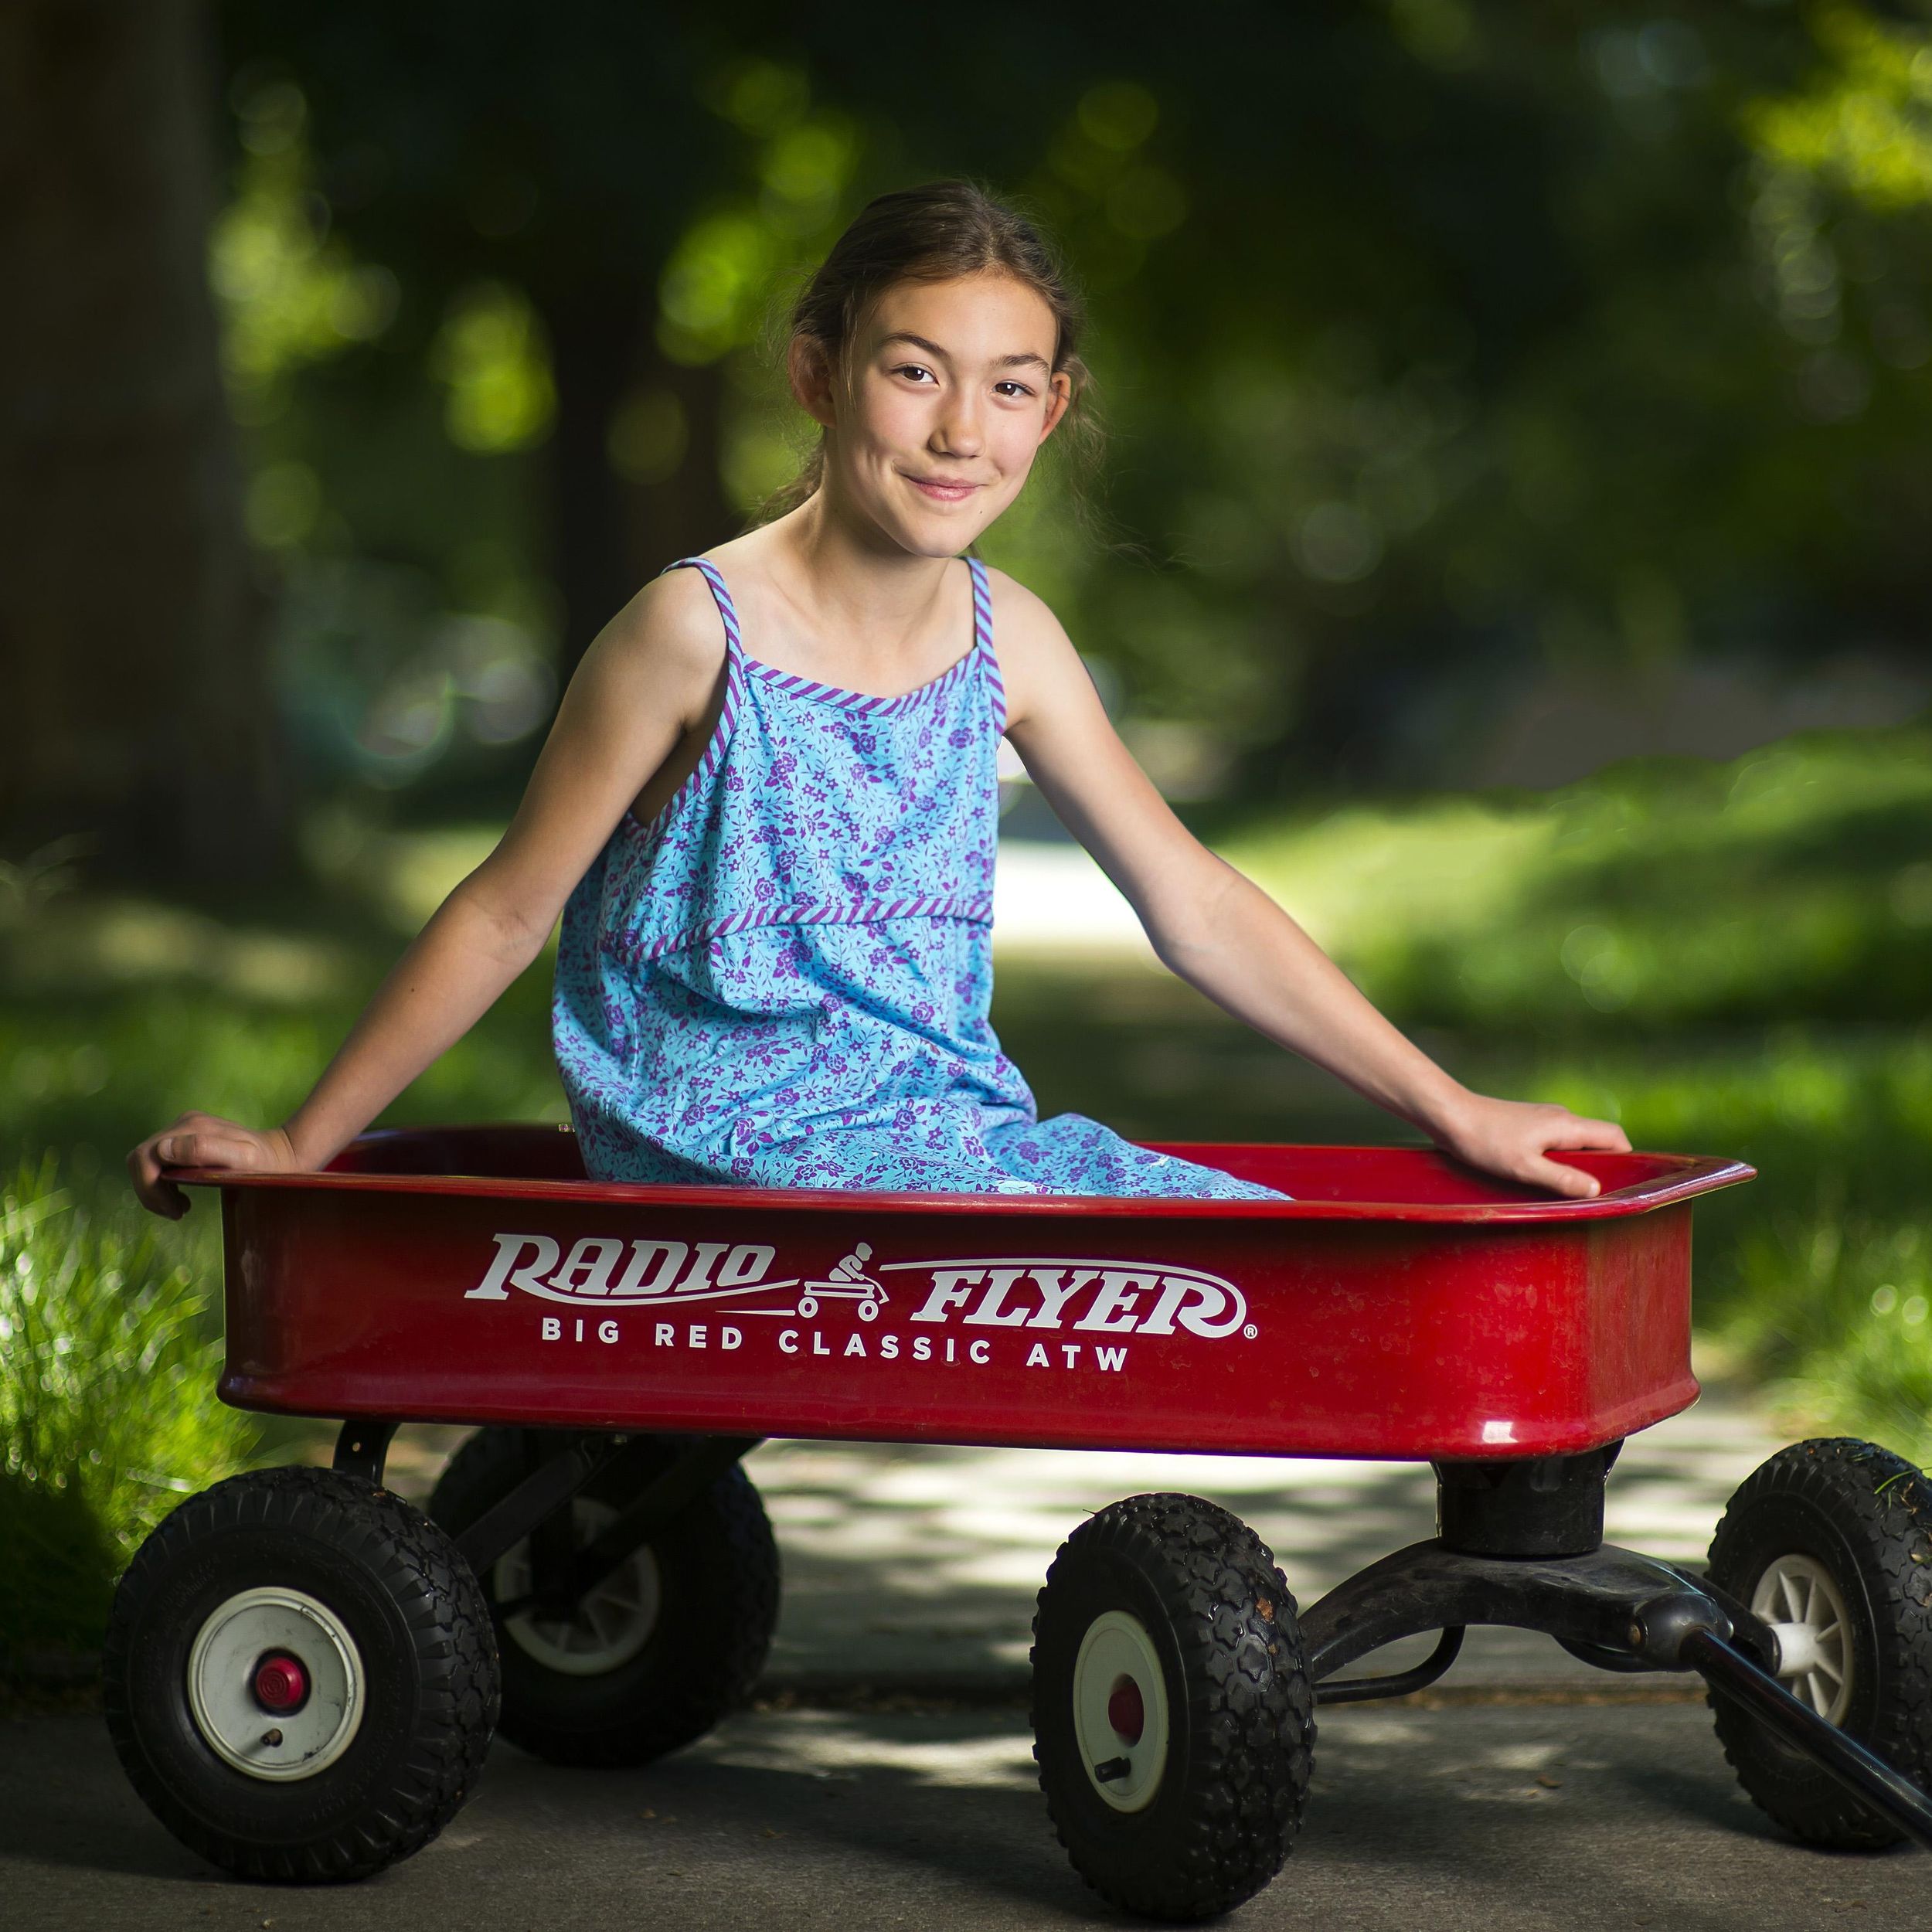 100 years of the Radio Flyer - July 22, 2017 | The Spokesman-Review